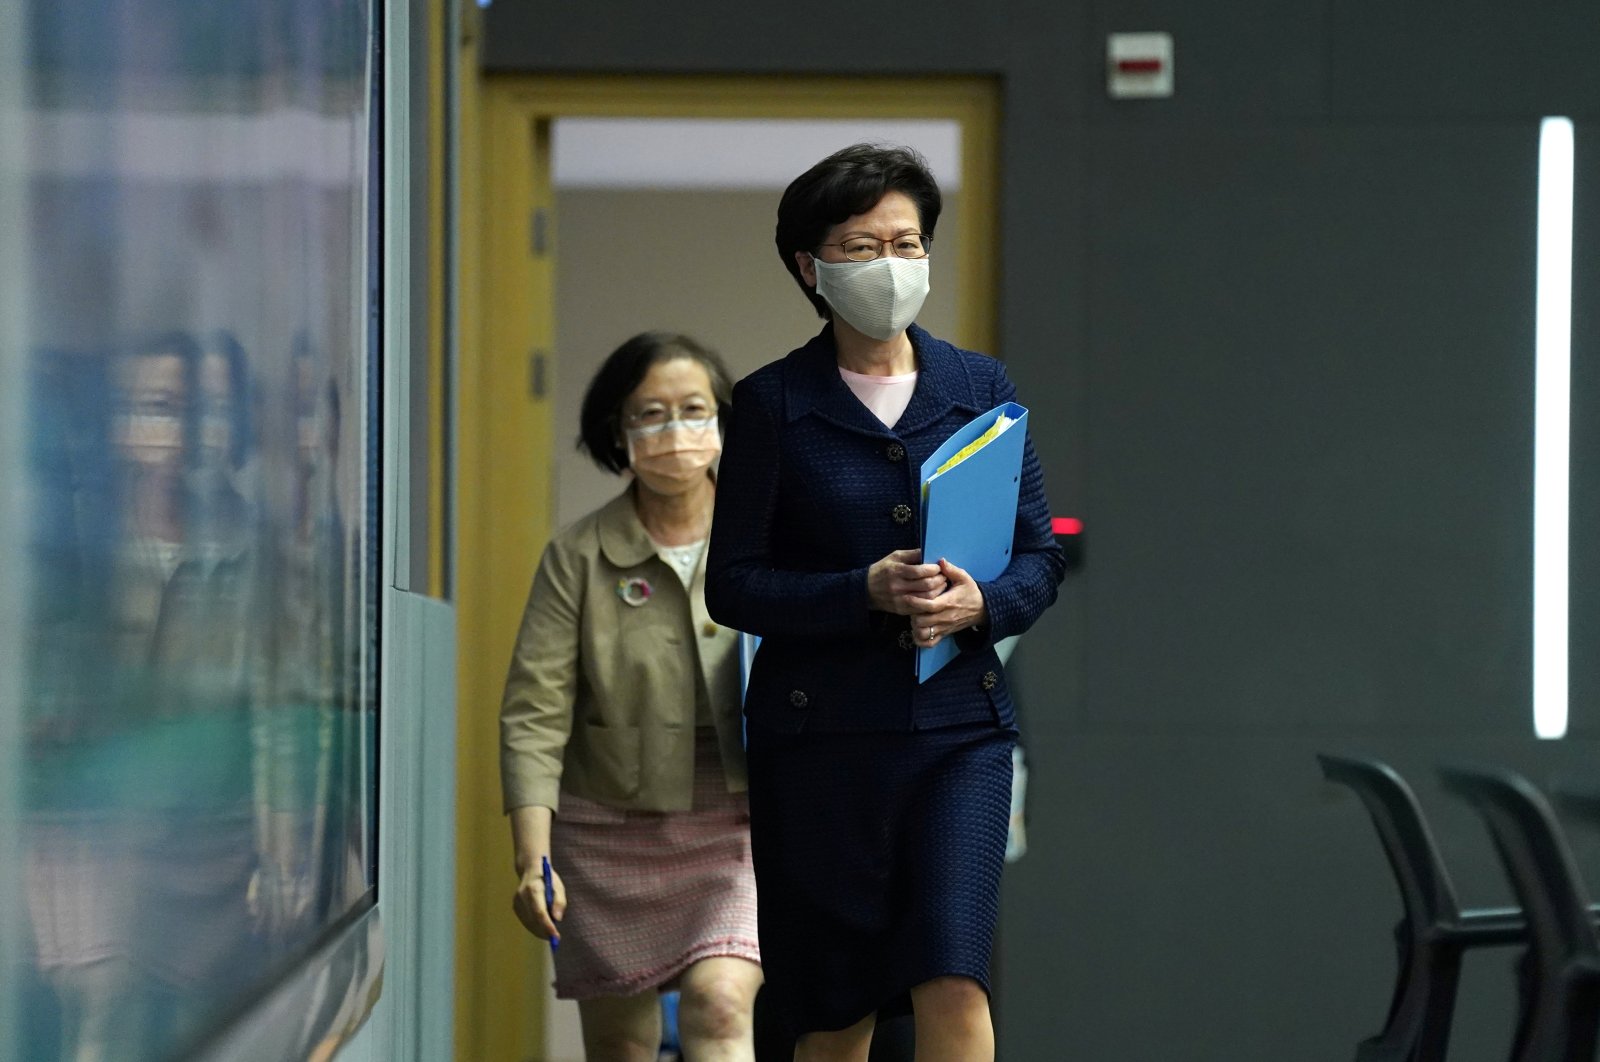 Hong Kong Chief Executive Carrie Lam, wearing a face mask following the coronavirus outbreak, arrives for a news conference in Hong Kong, China, July 31, 2020. (Reuters Photo)